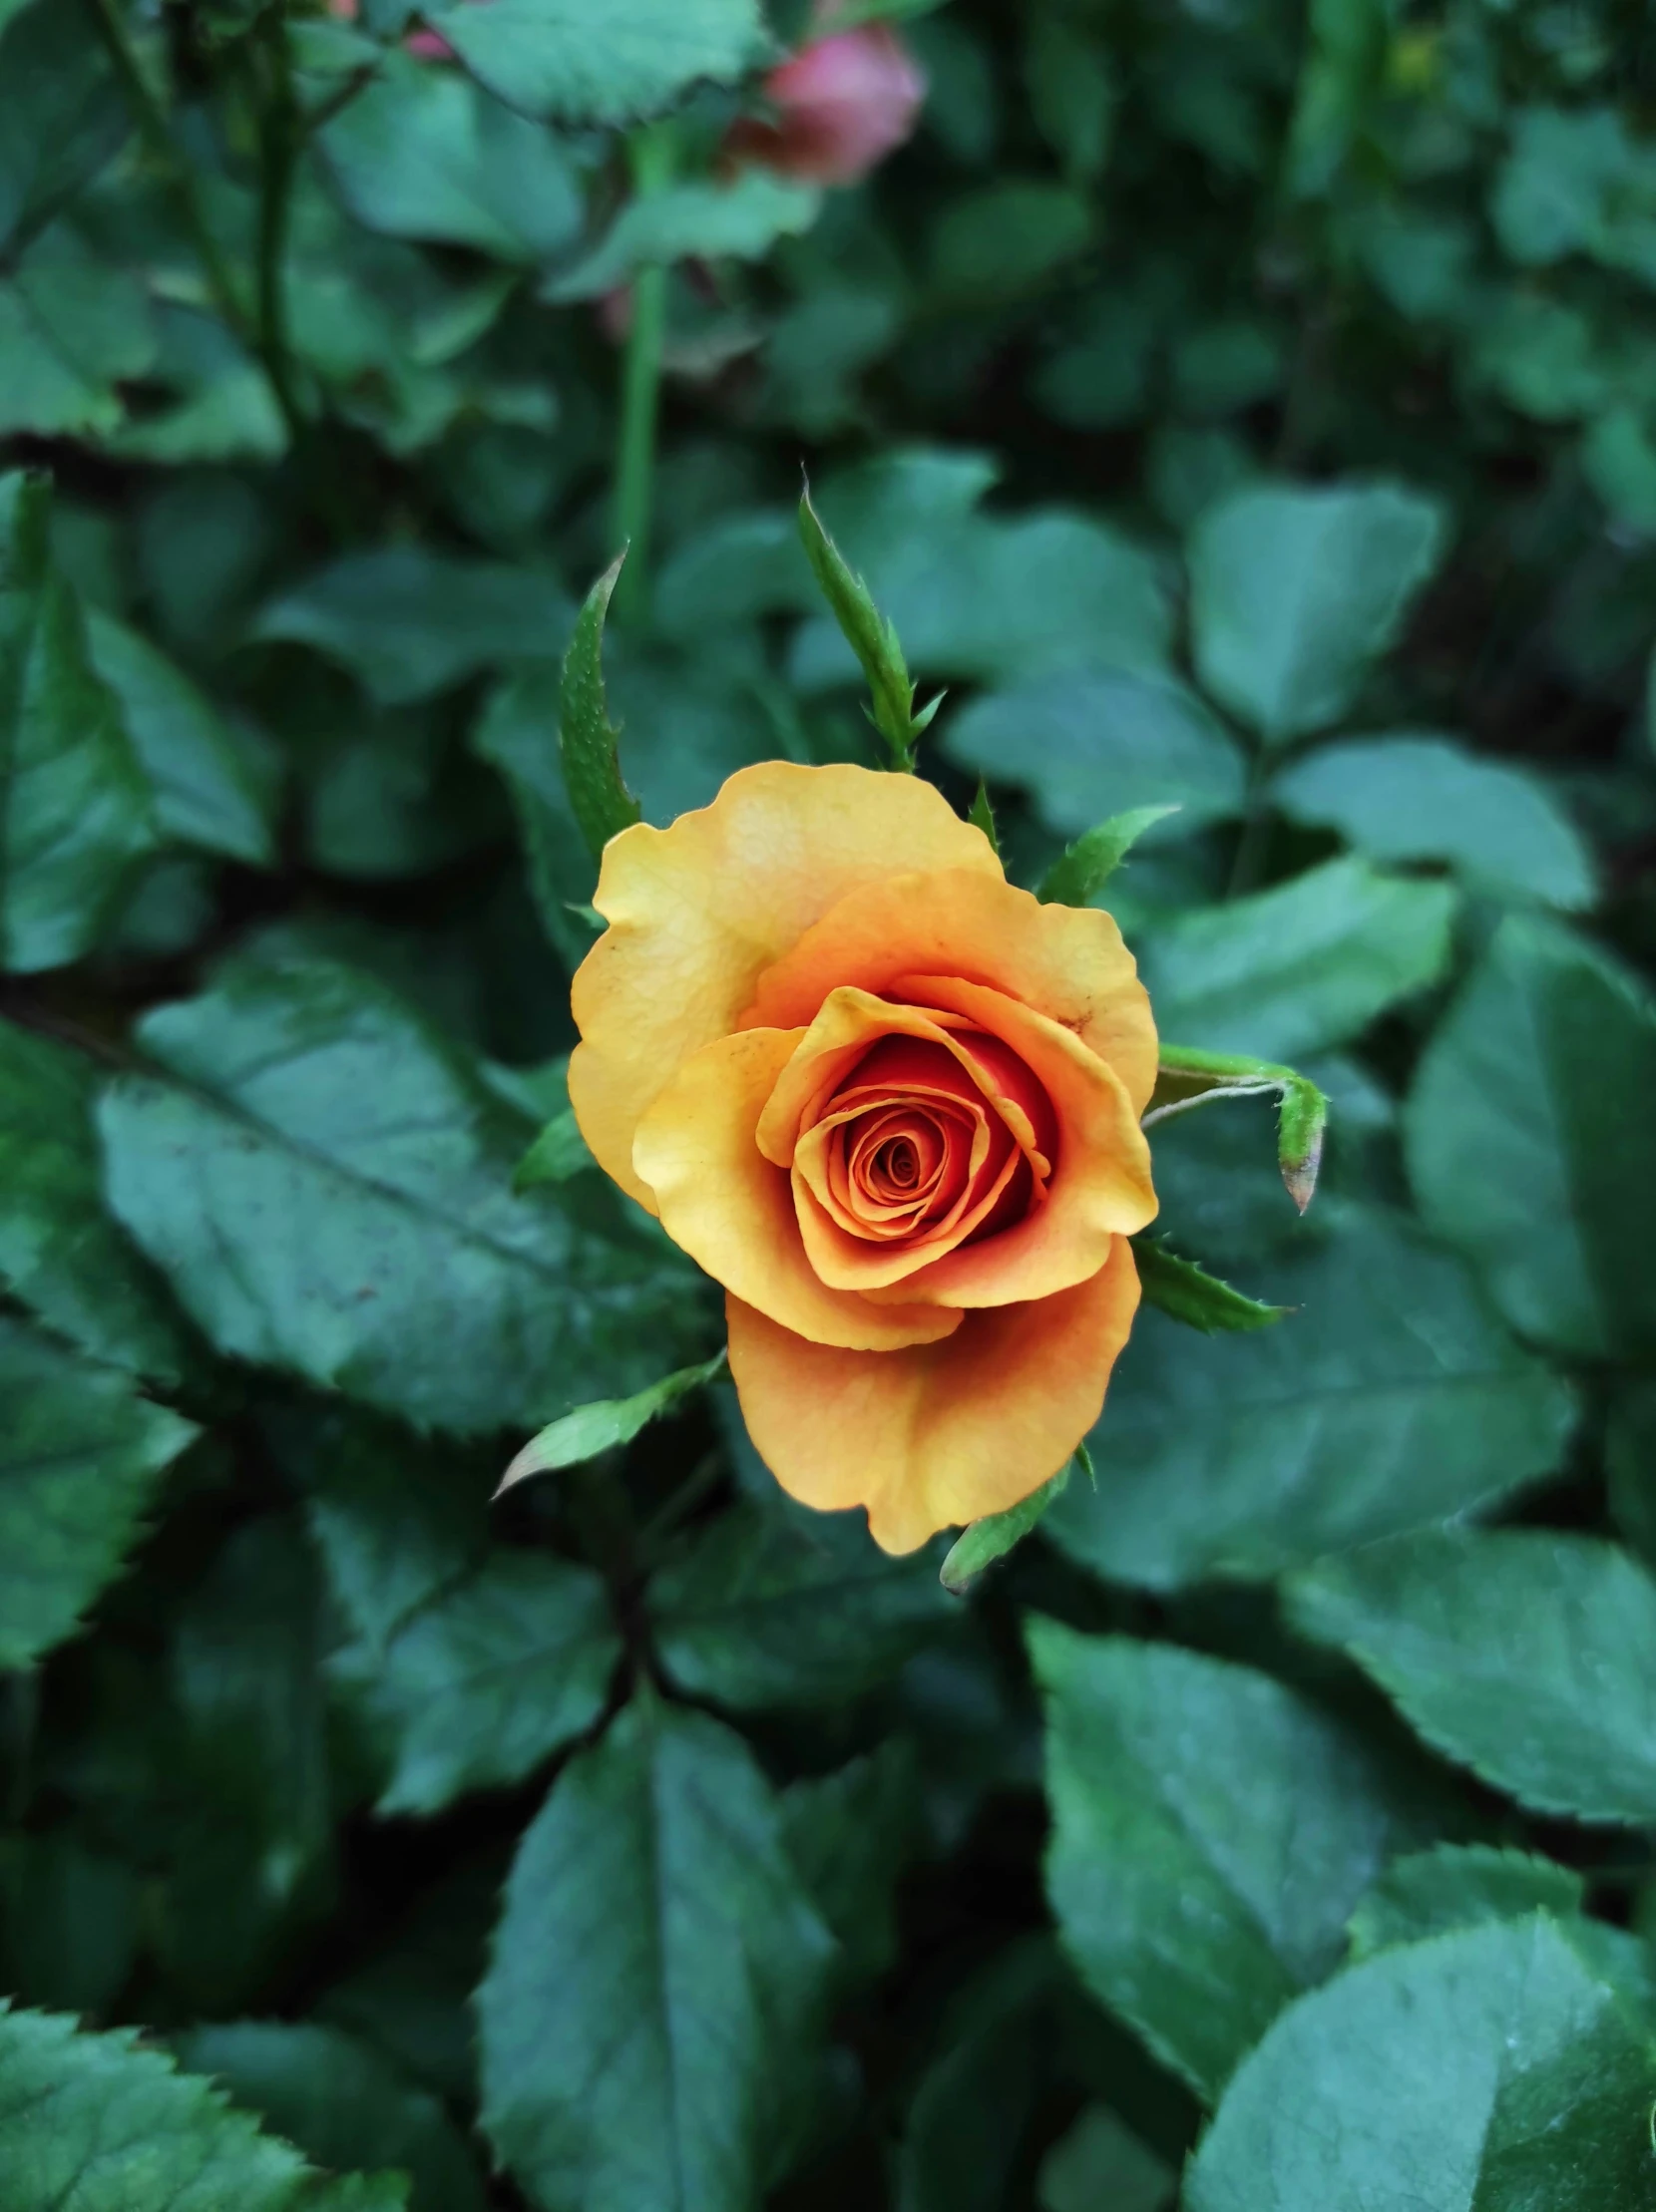 a single orange rose is blooming among the green leaves